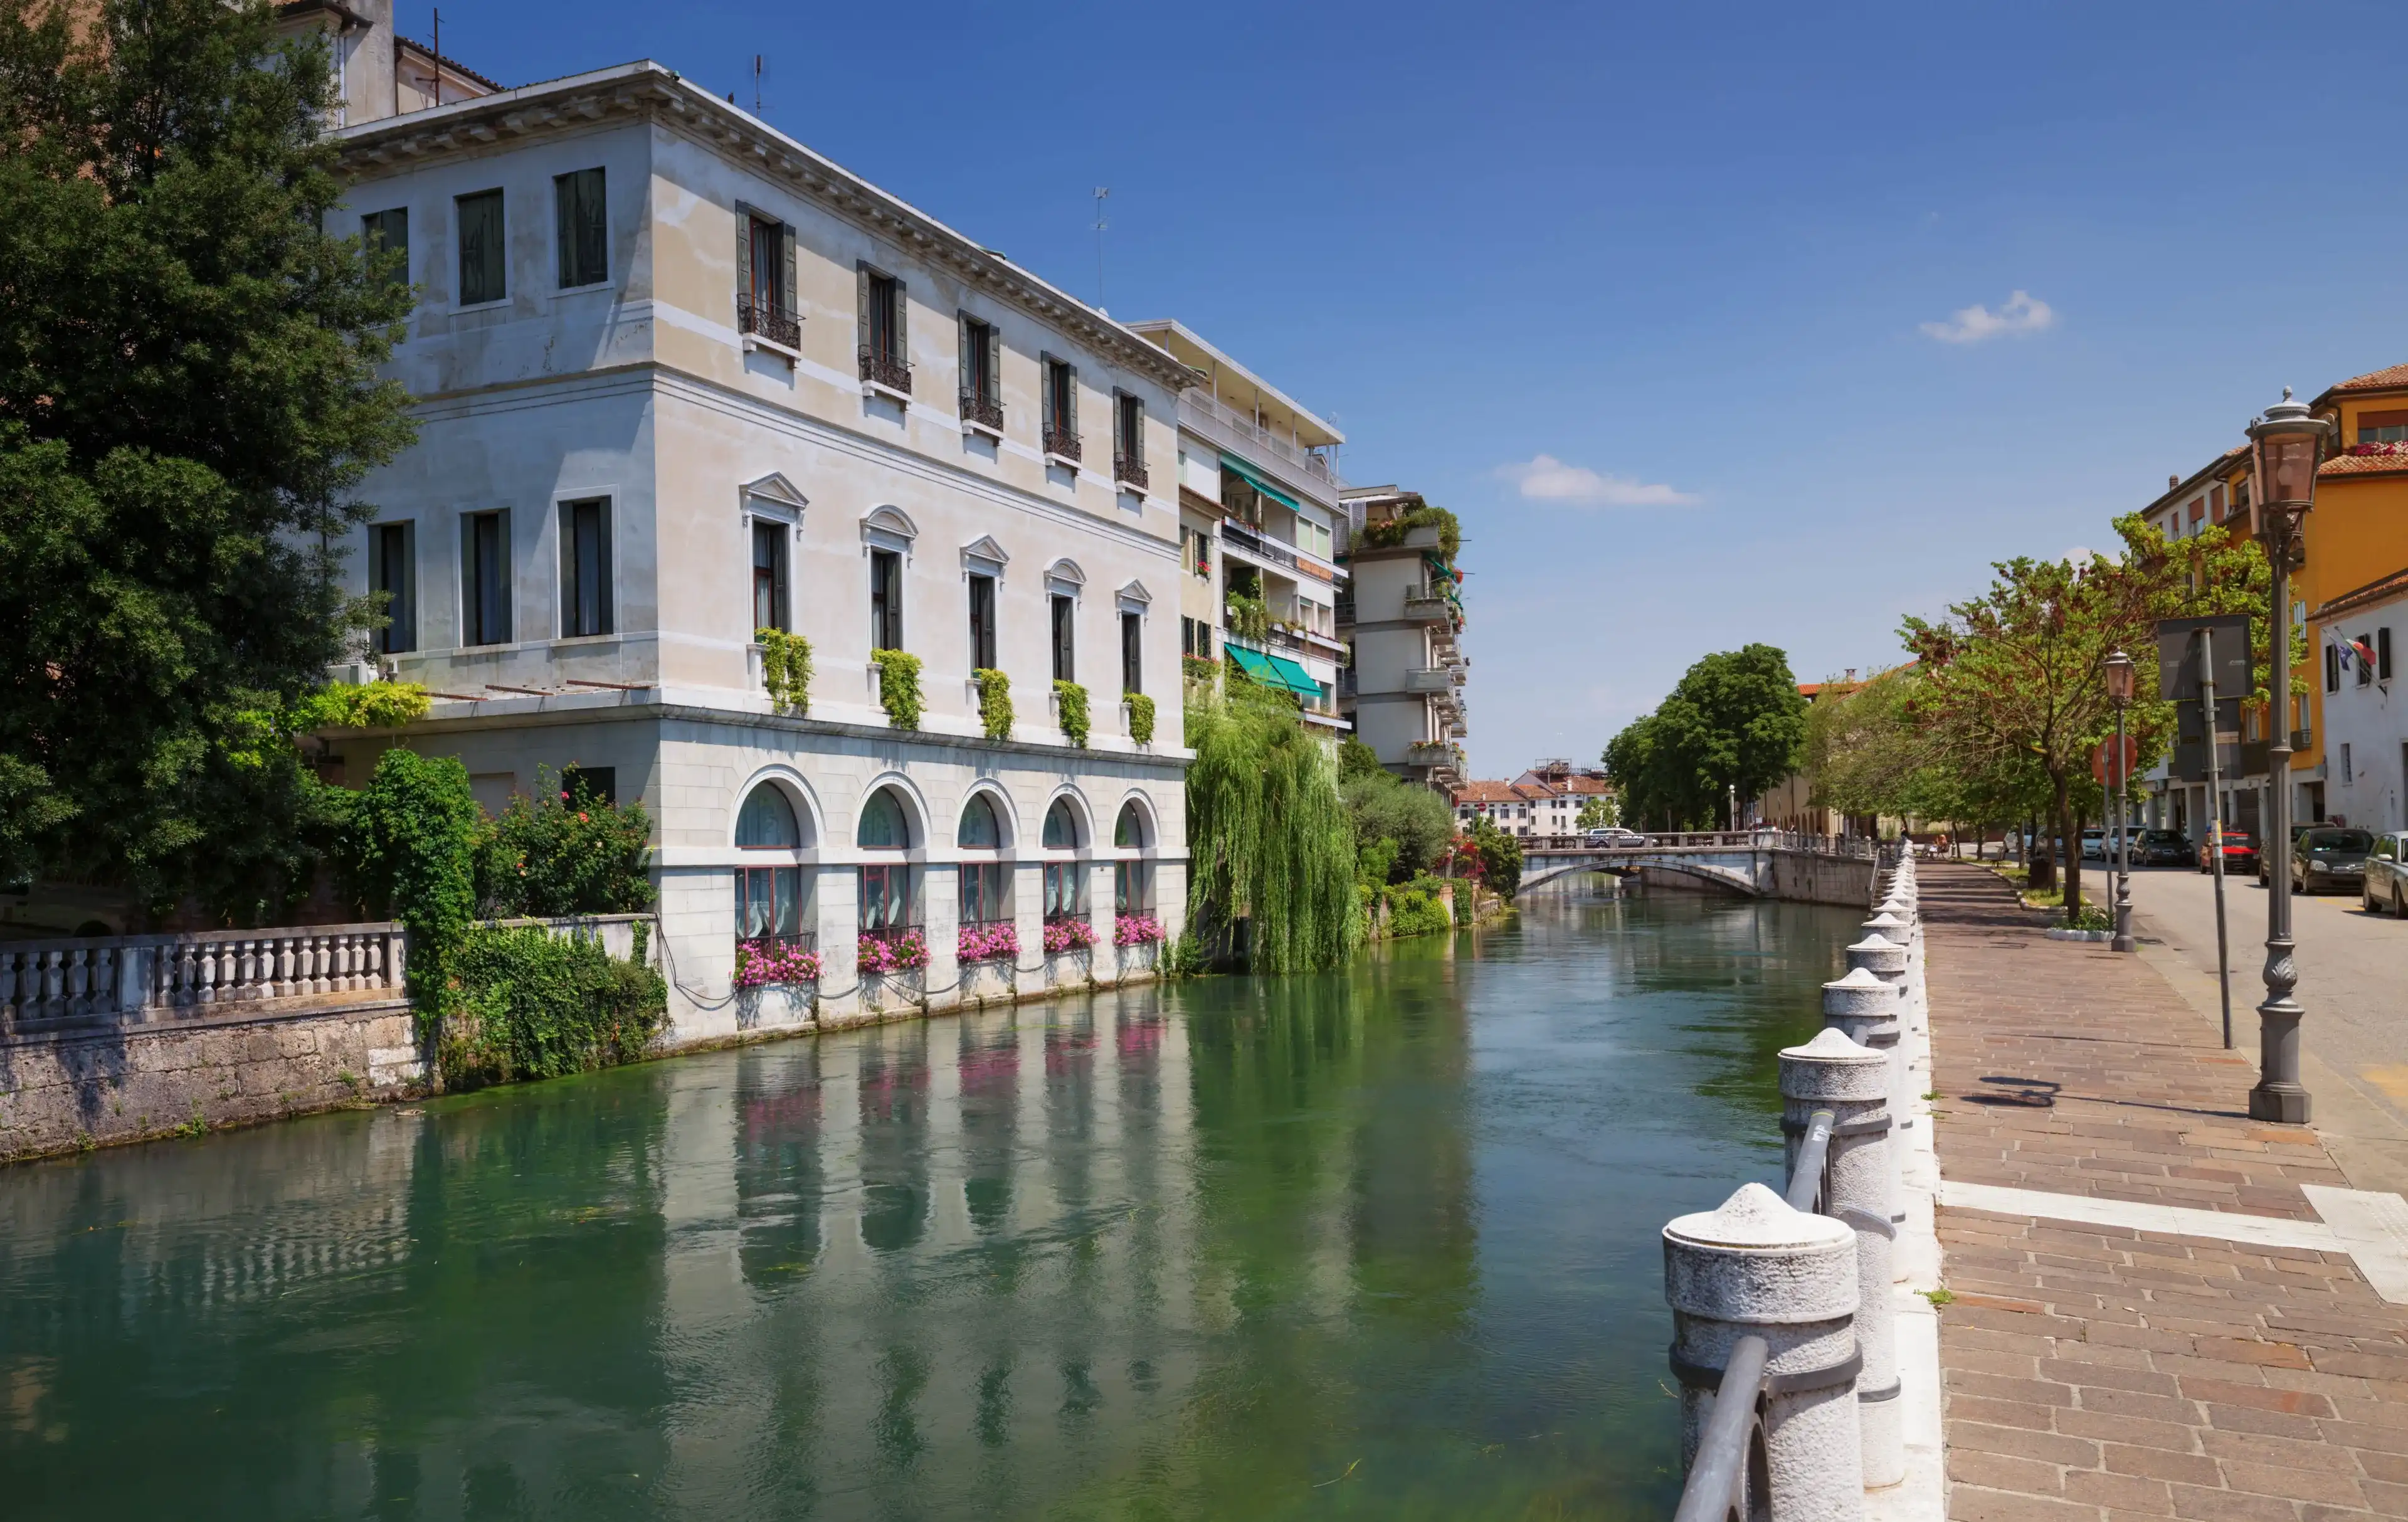 Best Treviso hotels. Cheap hotels in Treviso, Italy